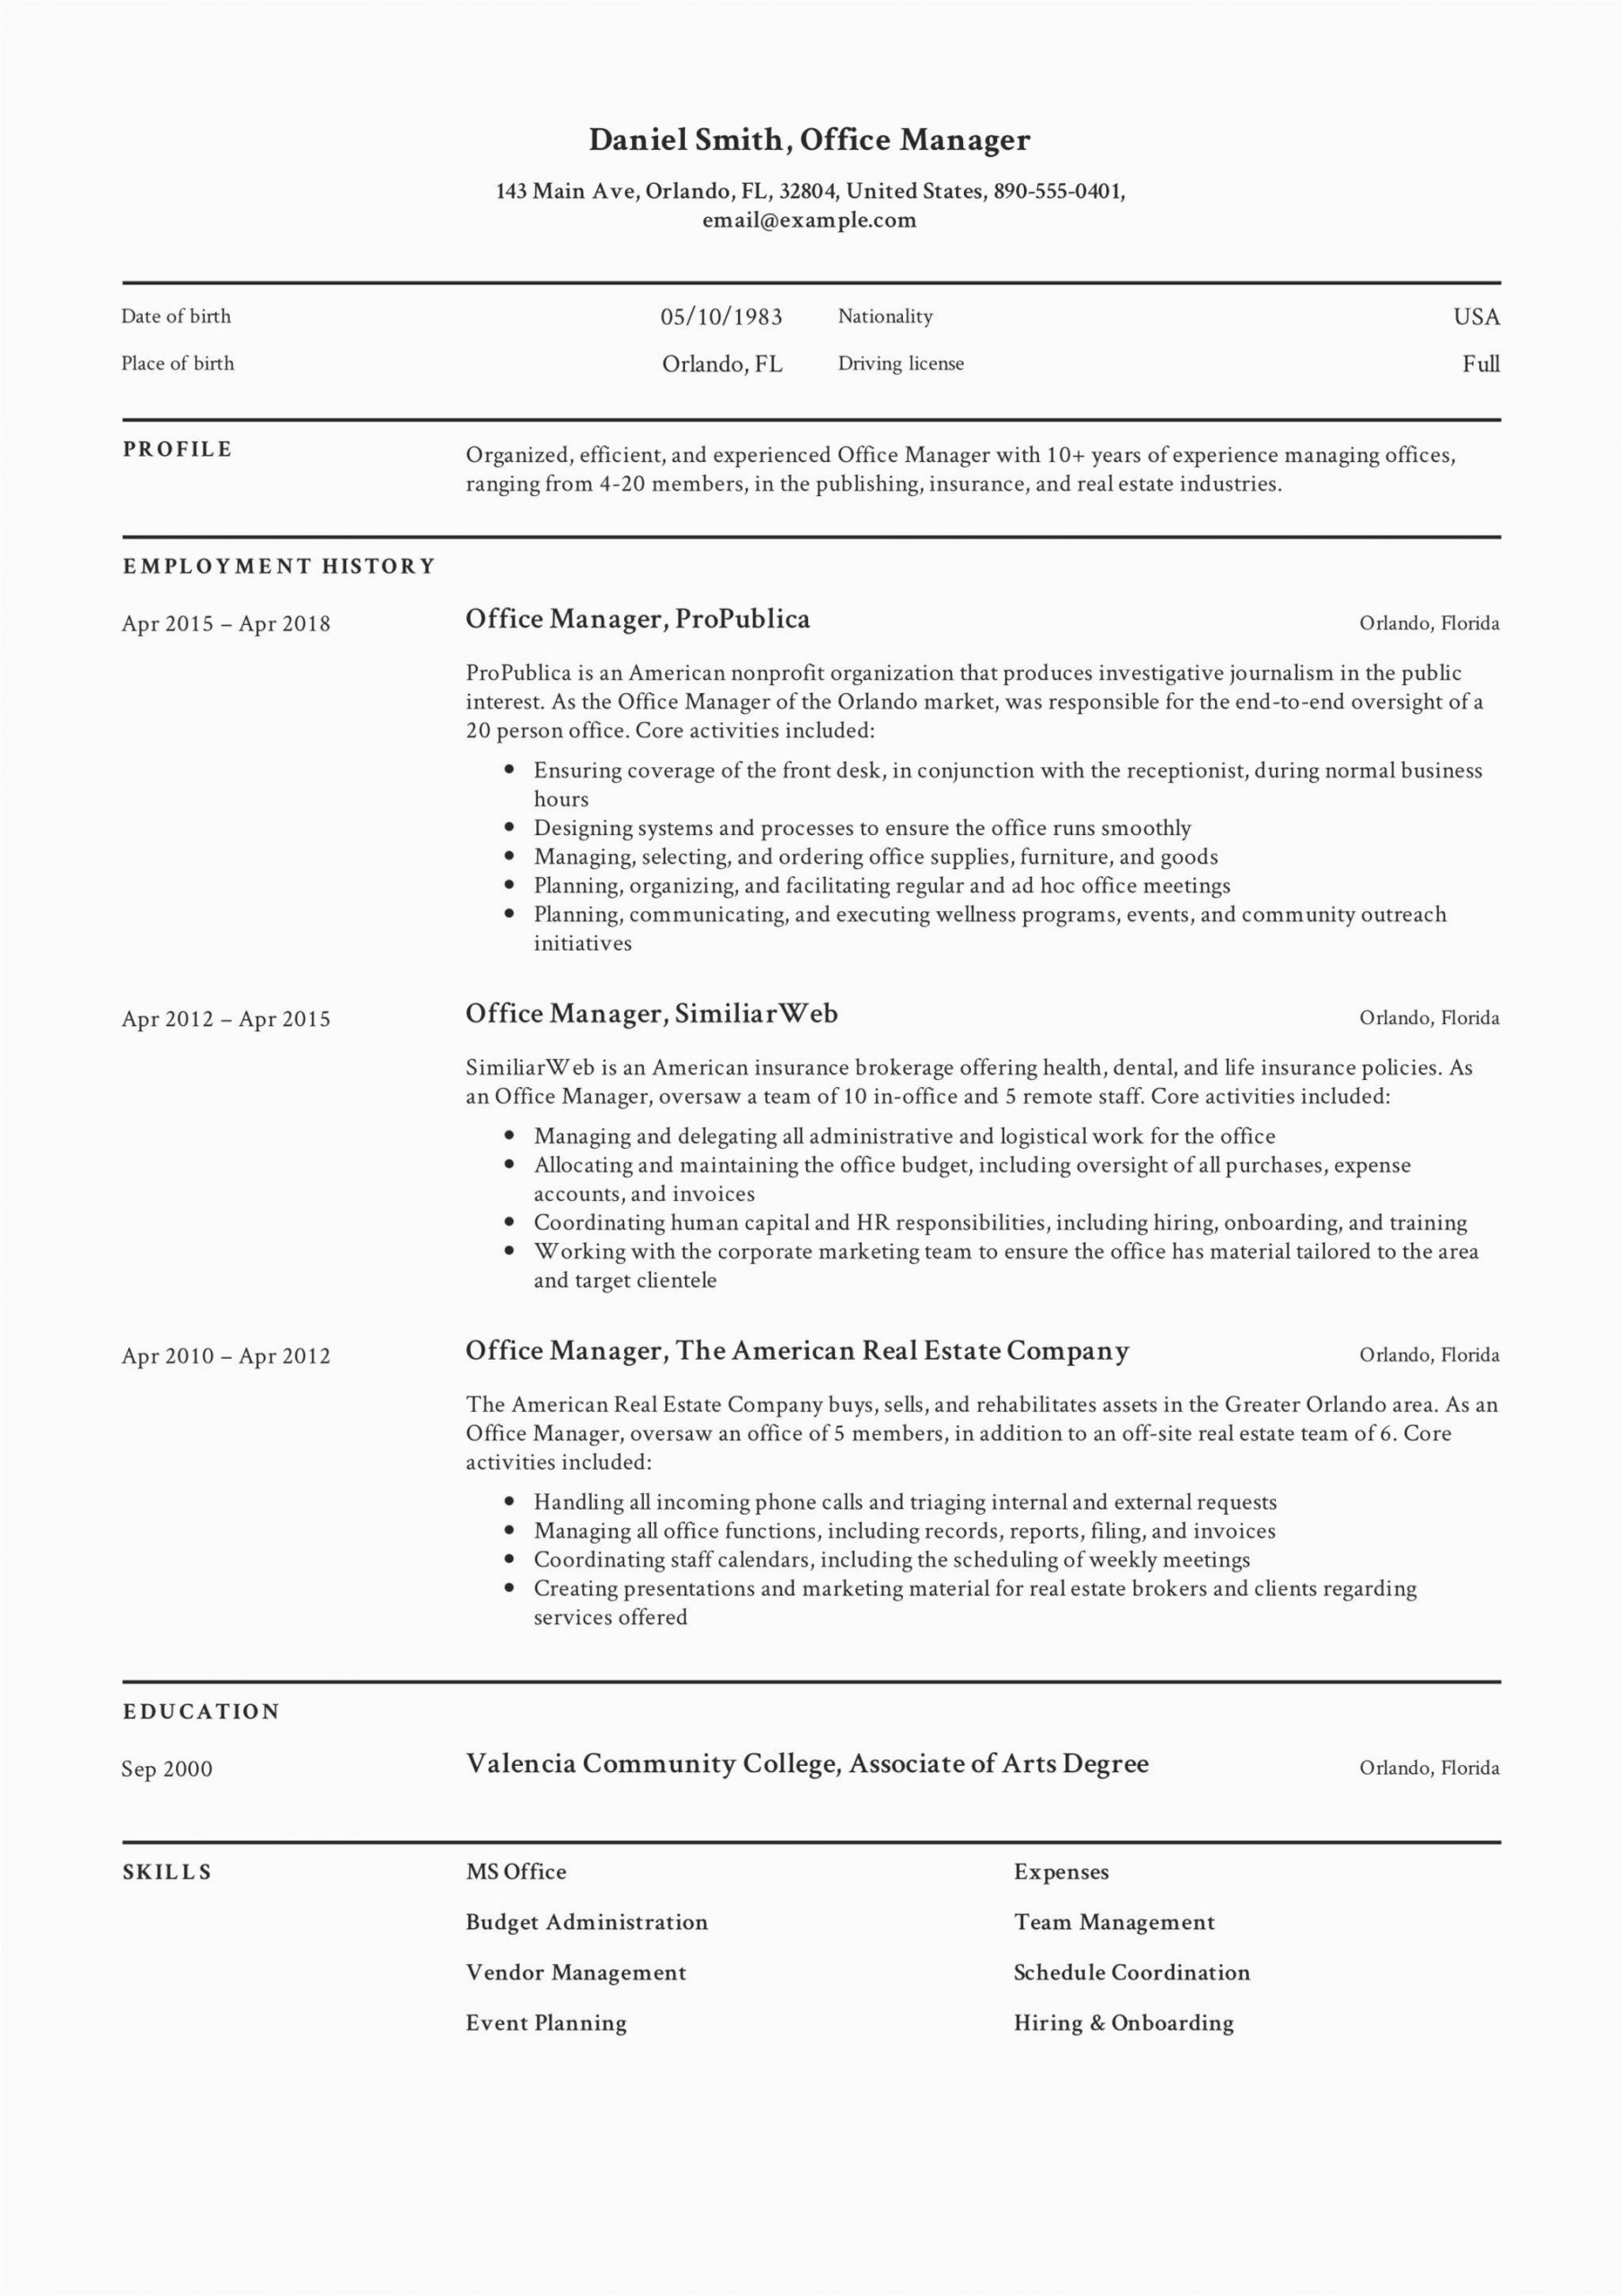 Sample Resume for Managing Director Position Fice Manager Resume In 2020